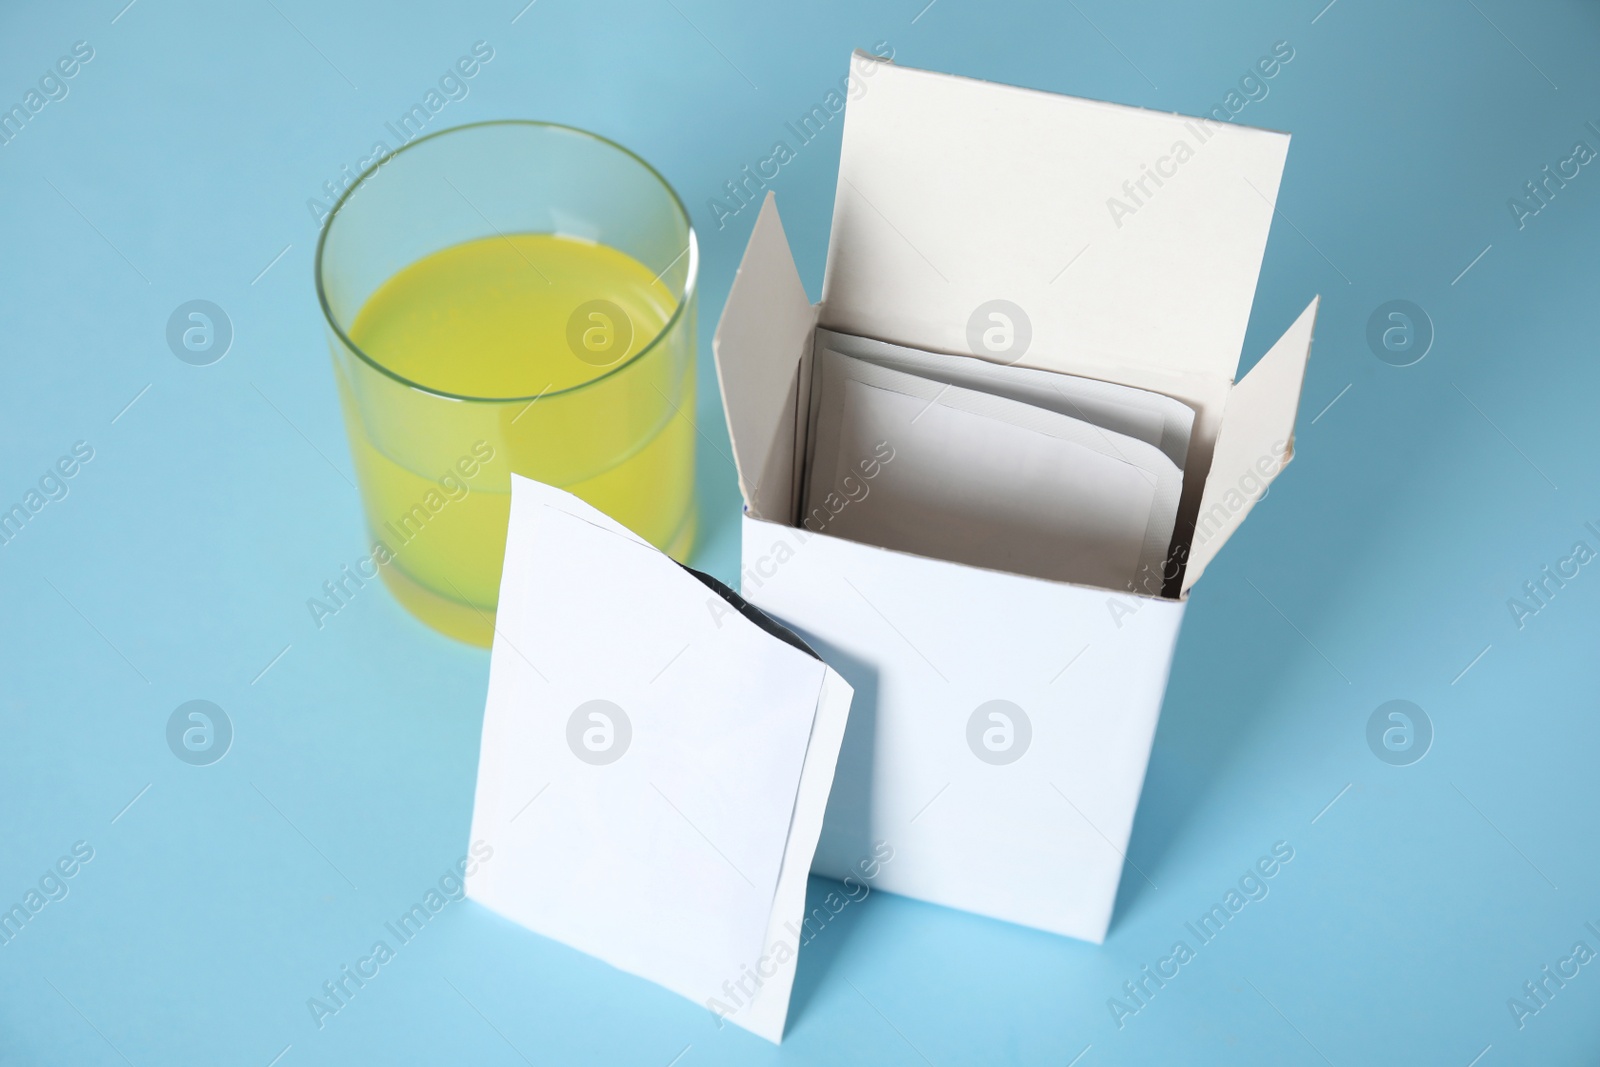 Photo of Box with sachets and glass of dissolved medicine on turquoise background